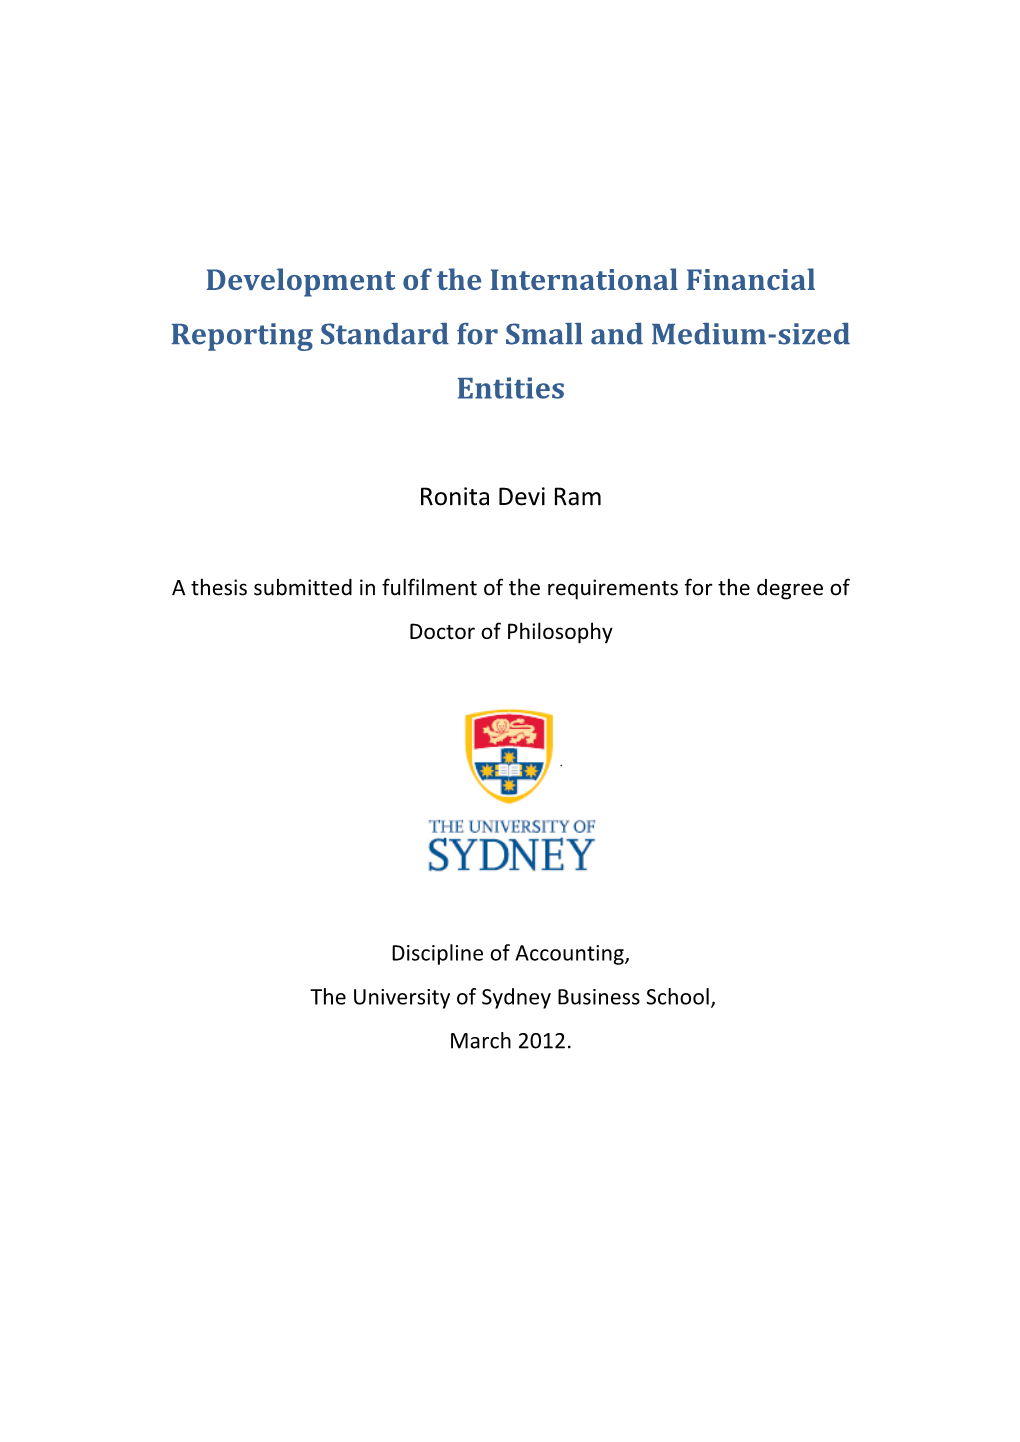 Ronita Ram Phd Thesis 2012 IFRS for Smes